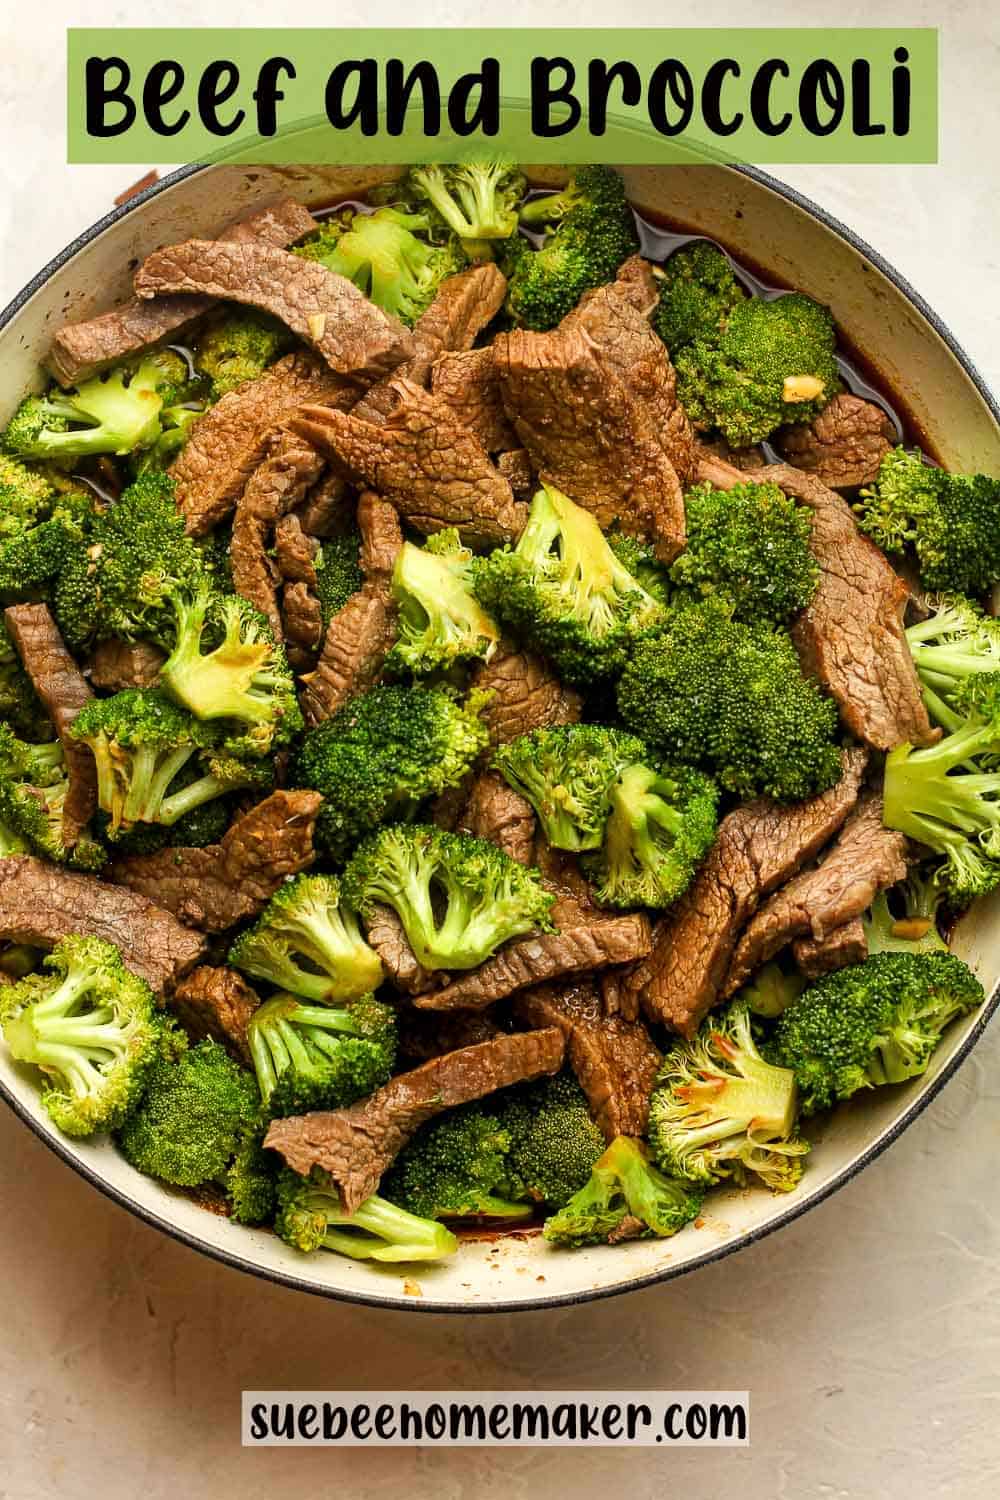 A braised of beef and broccoli with sauce.